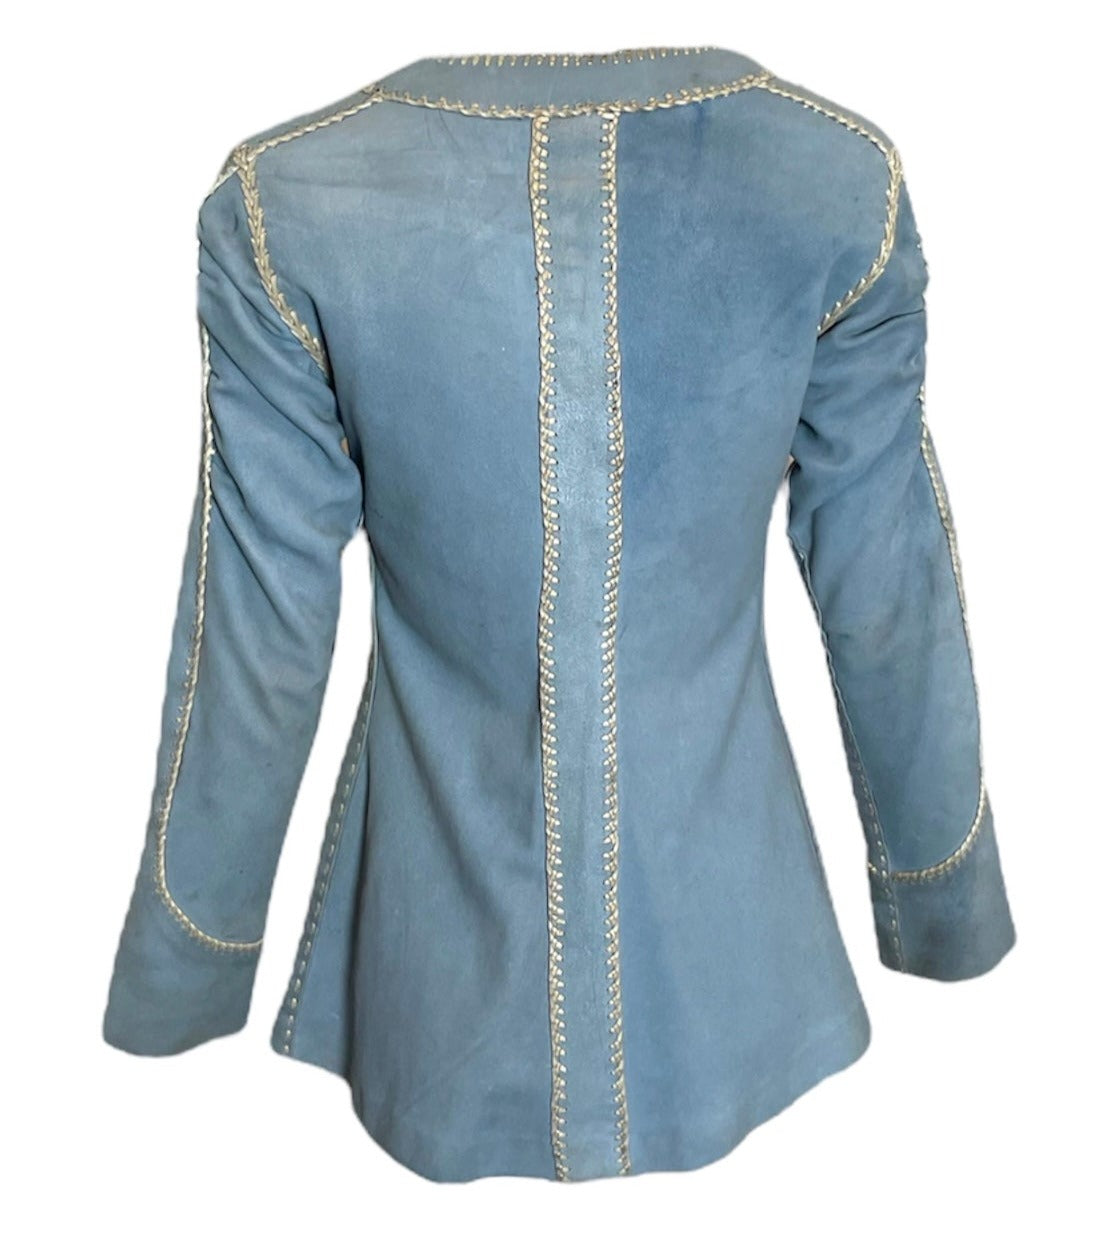 North Beach Leather 70s Baby Blue Suede Whipstitch Jacket – THE